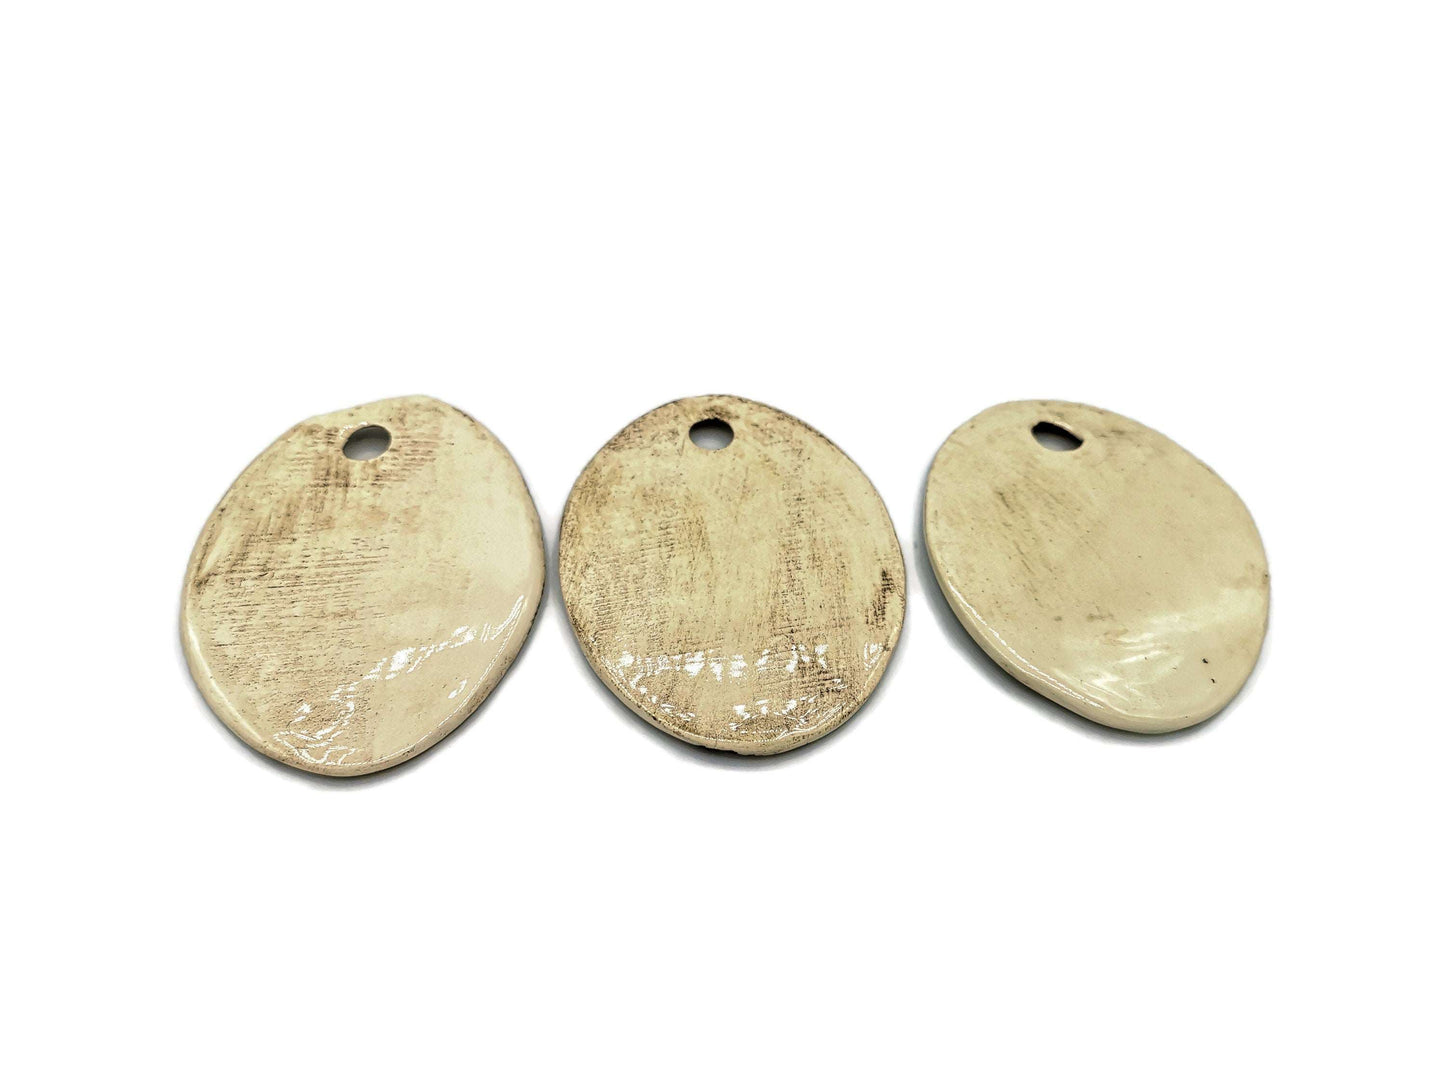 1Pc 85mm Extra Large Handmade Ceramic Necklace Pendant for Jewelry Making, Rustic Pressed Sage Leavf Jumbo Clay Charm For Eclectic Fashion